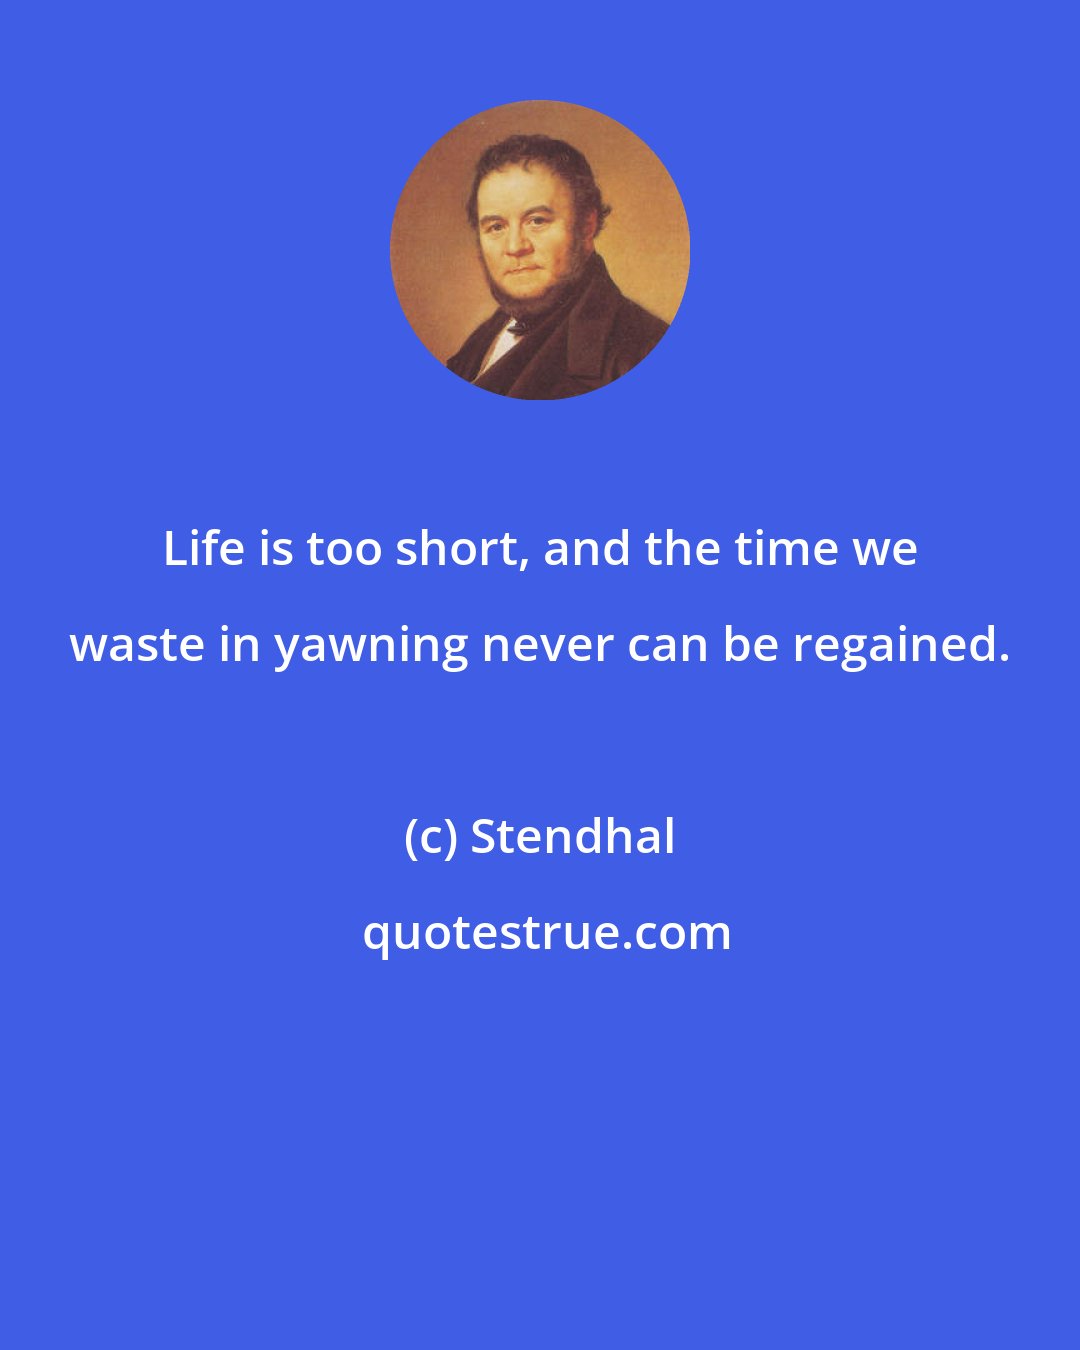 Stendhal: Life is too short, and the time we waste in yawning never can be regained.